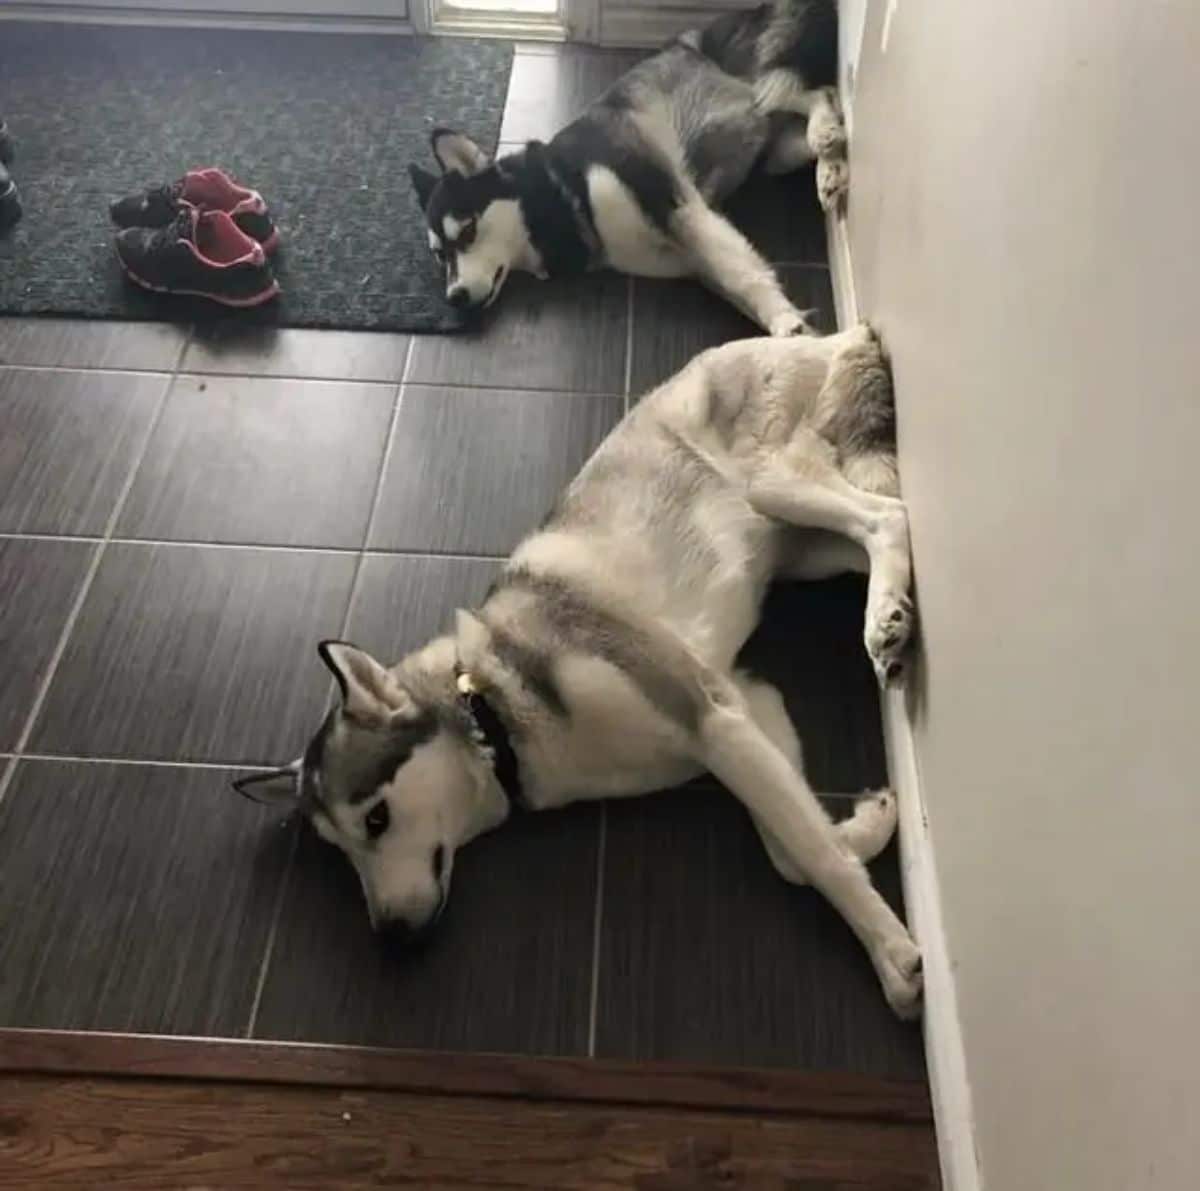 2 black and white huskies laying on the floor with their feet on the wall